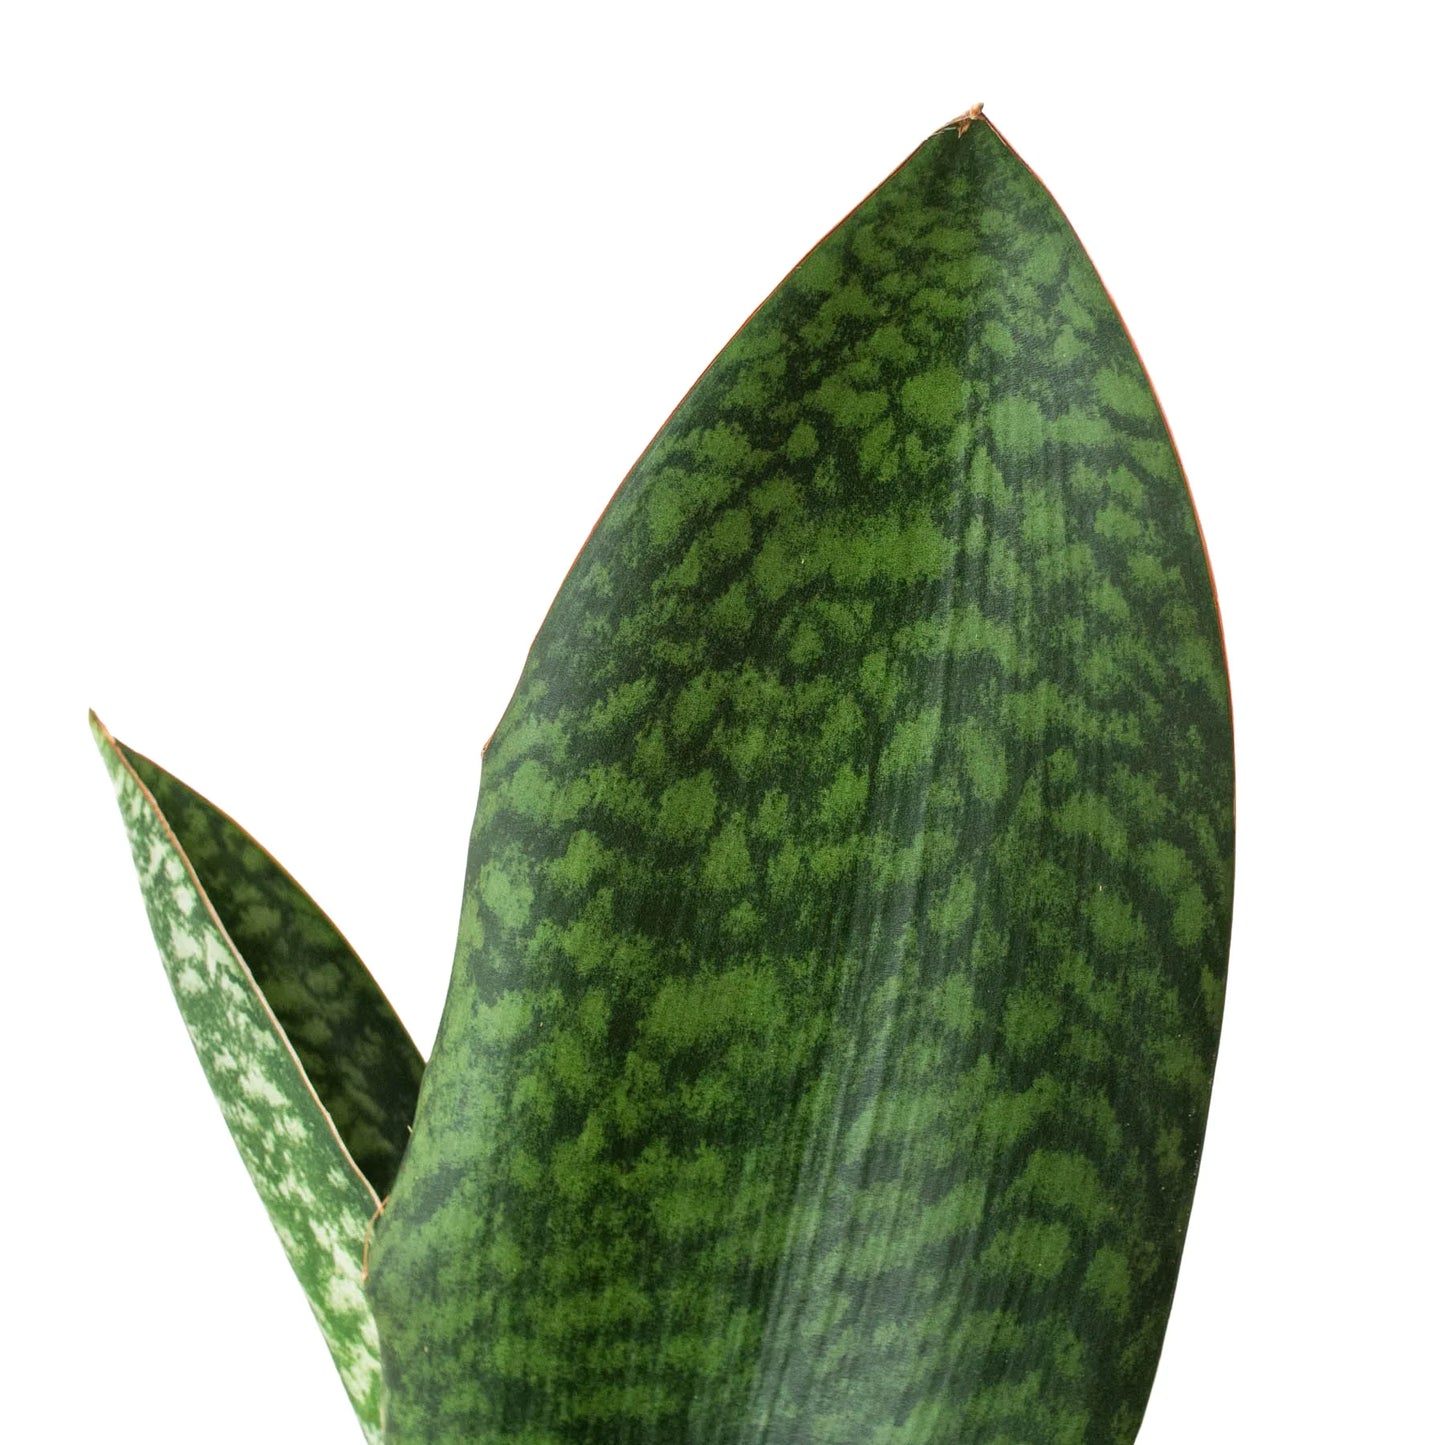 Whale of a Time: Shark Fin Snake Plant - Unique, Easy Care Indoor Plant with Enormous Paddle-Like Leaves